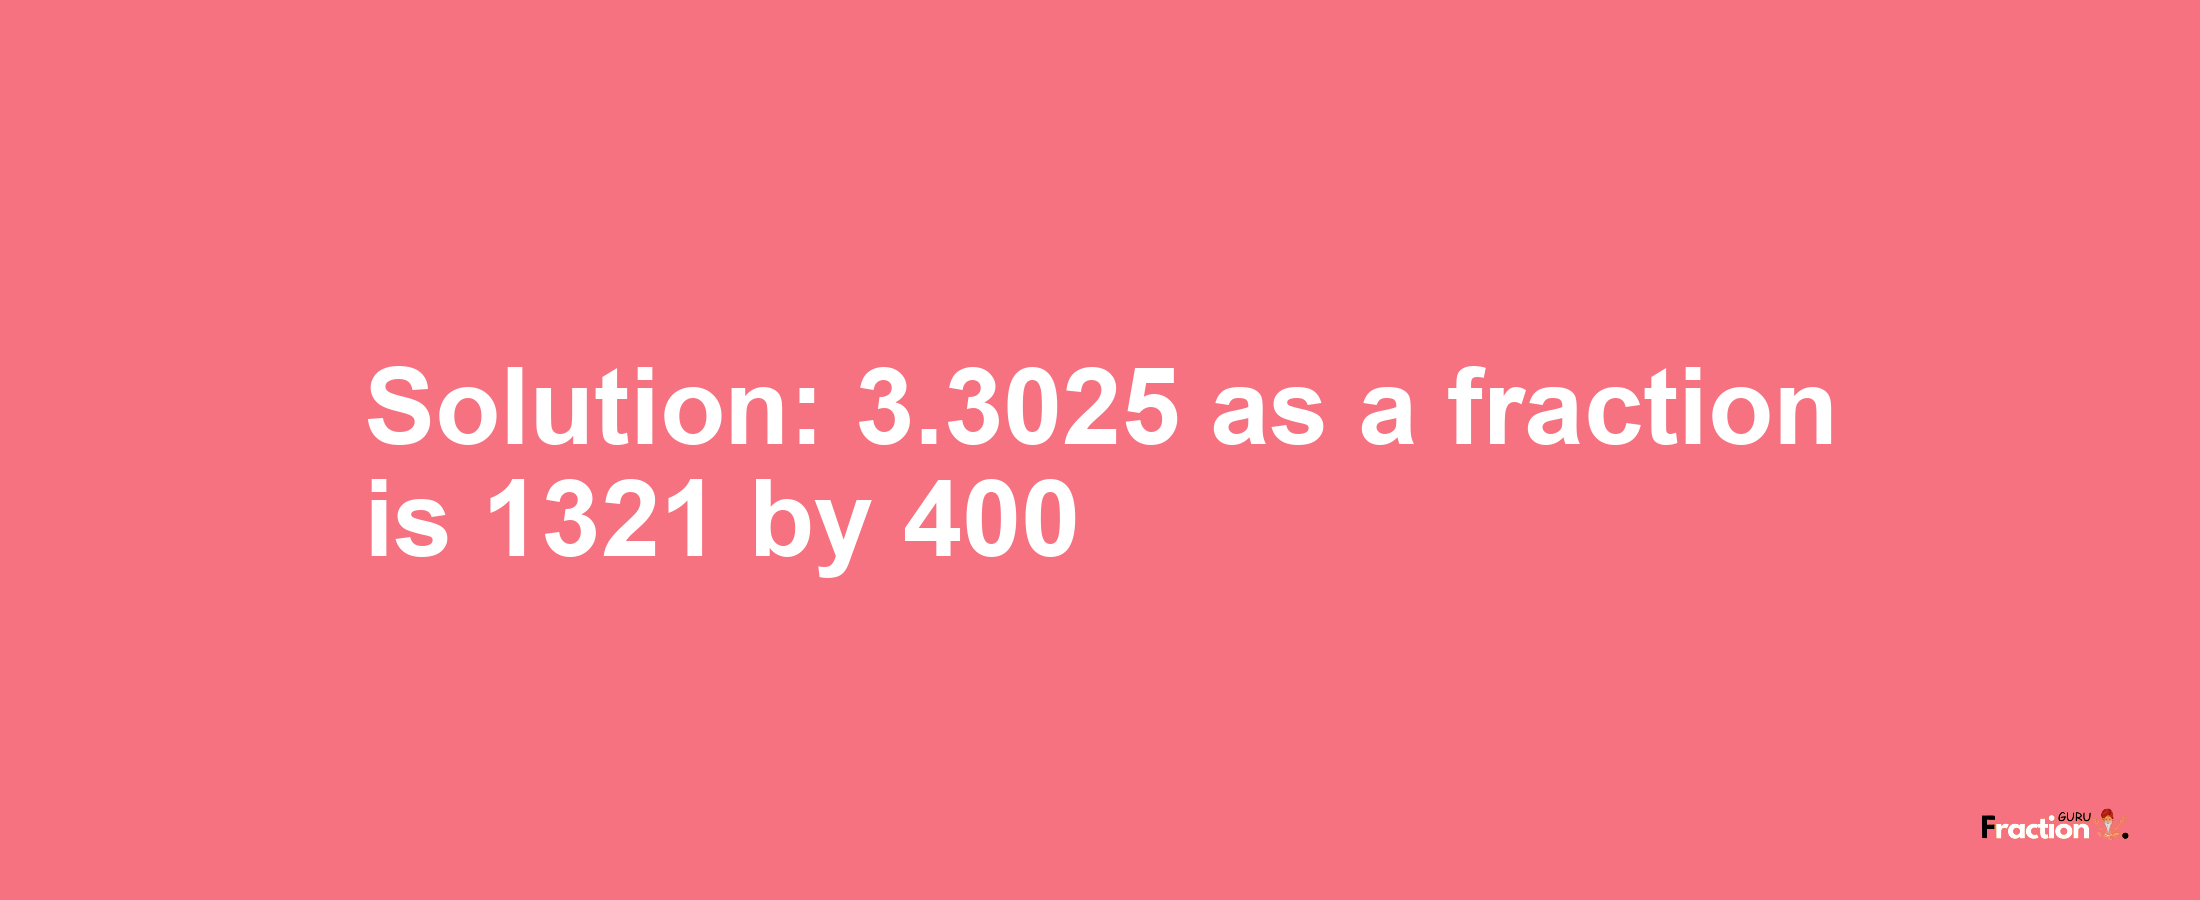 Solution:3.3025 as a fraction is 1321/400